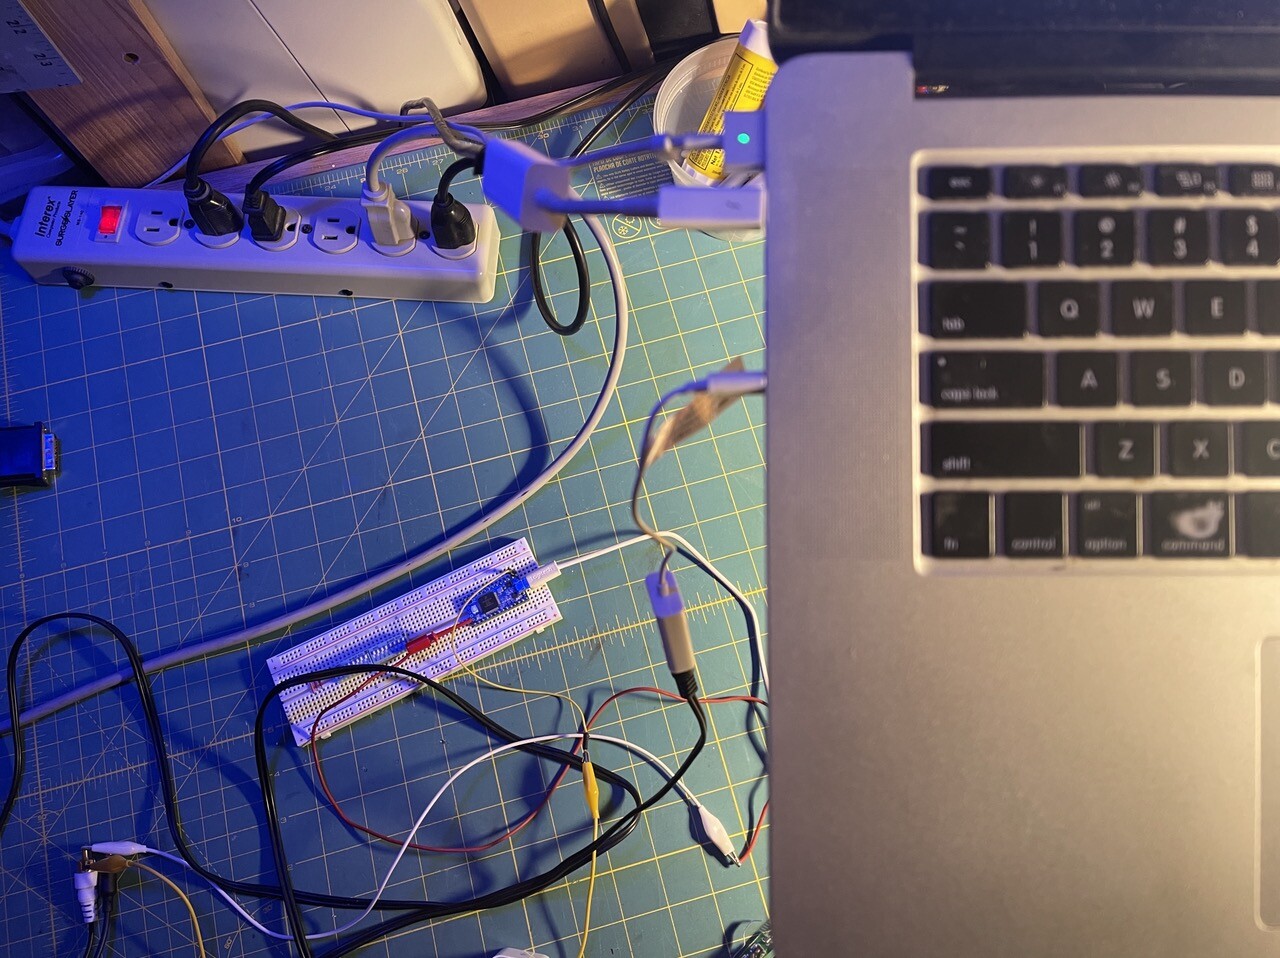 In the foreground on the right is half the keyboard of a 2009 MacBook. Below on the left is a protoboard with a teensy, wires, and a power strip all on a green workbench mat. 